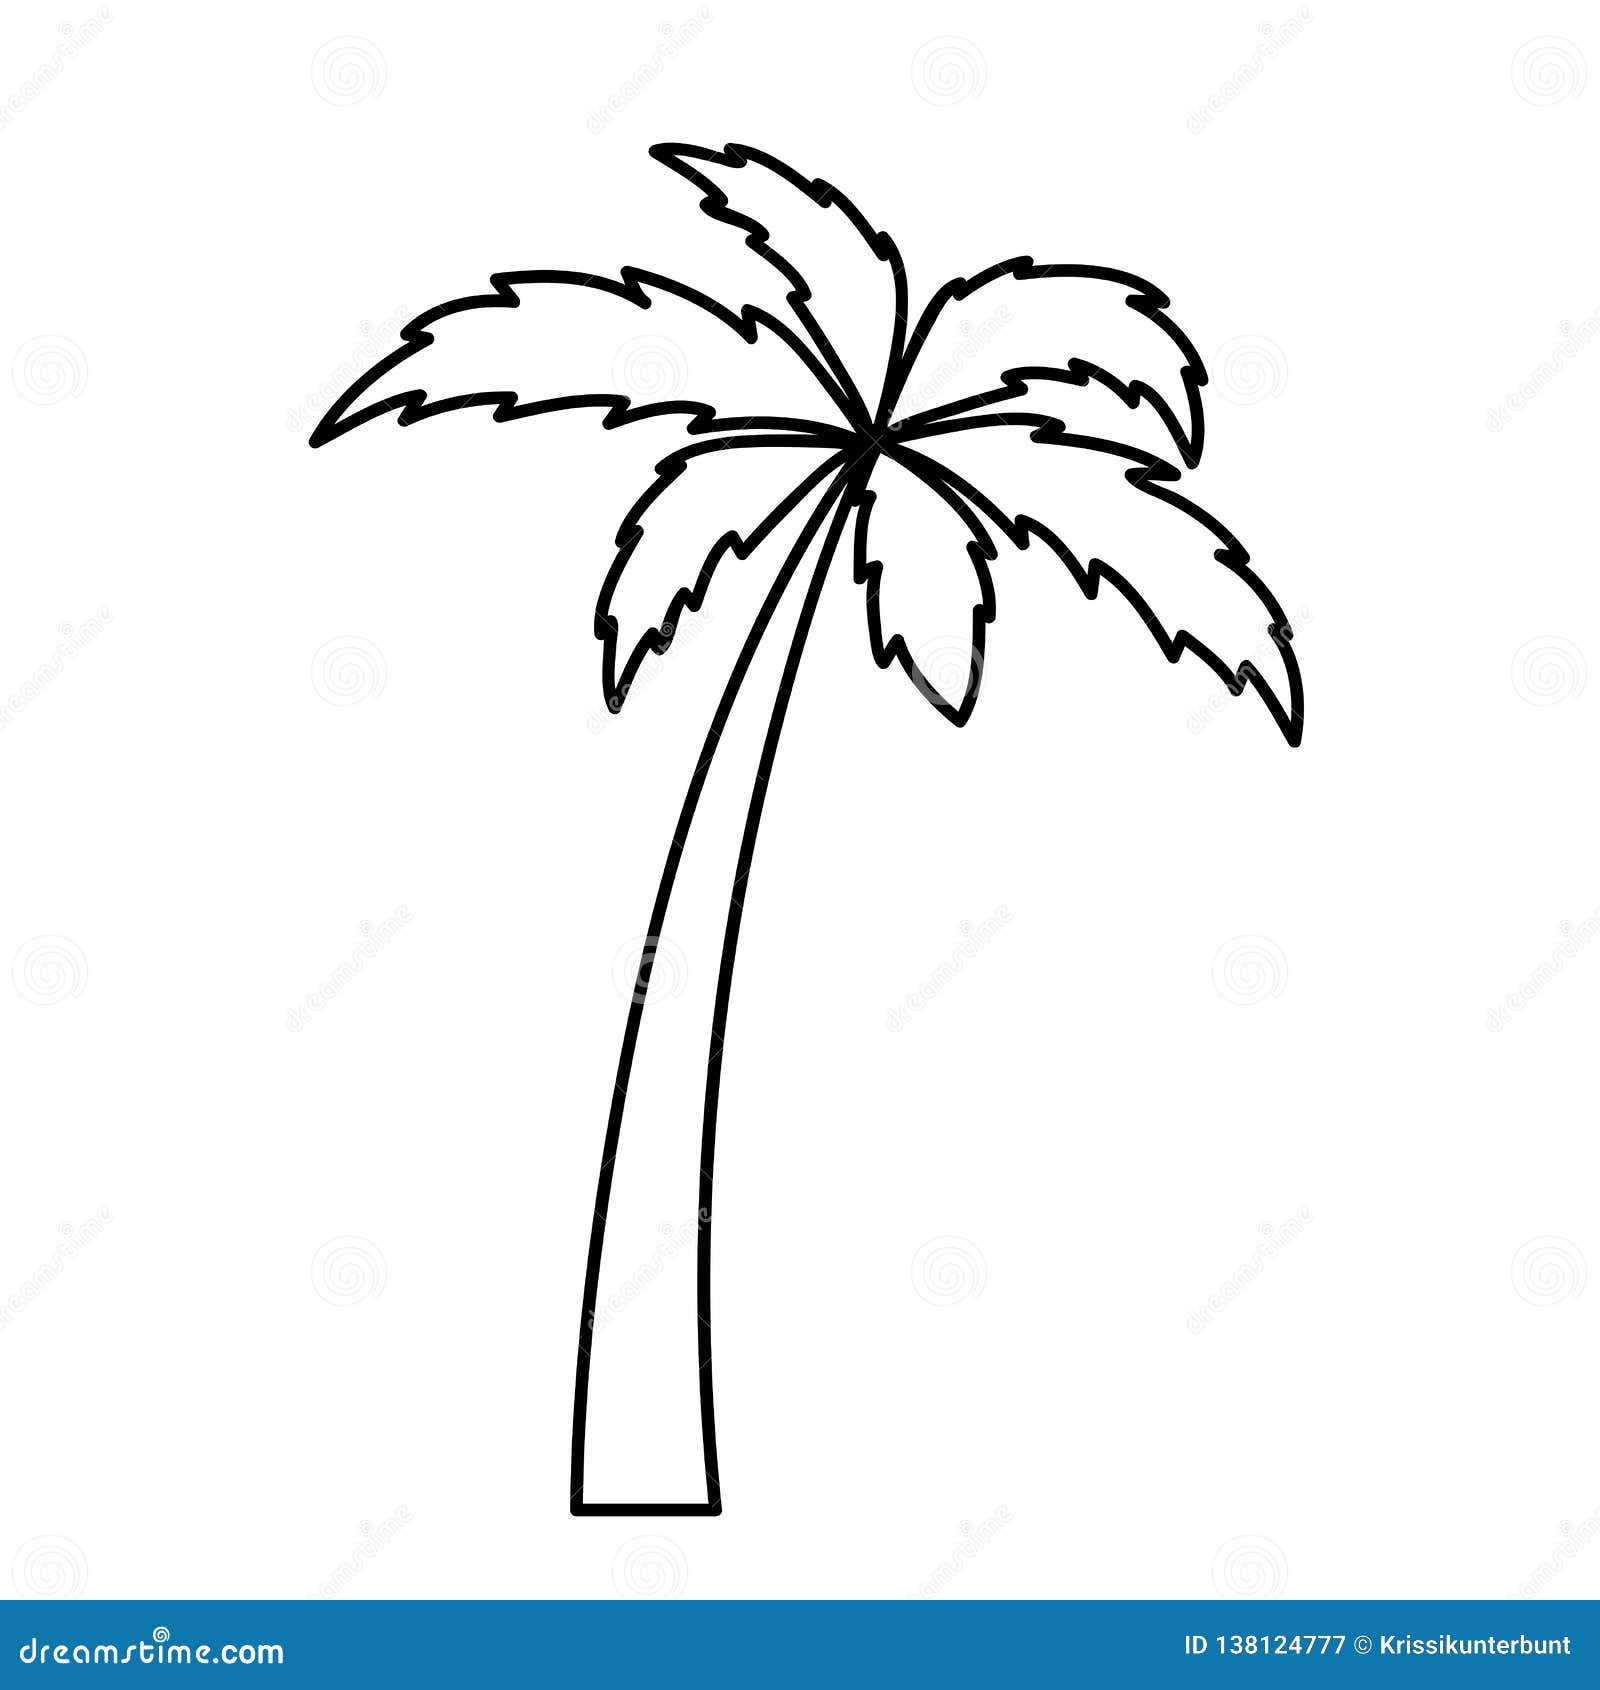 How To Draw A Palm Tree Step By Step 🌴 Palm Tree Drawing Easy - YouTube